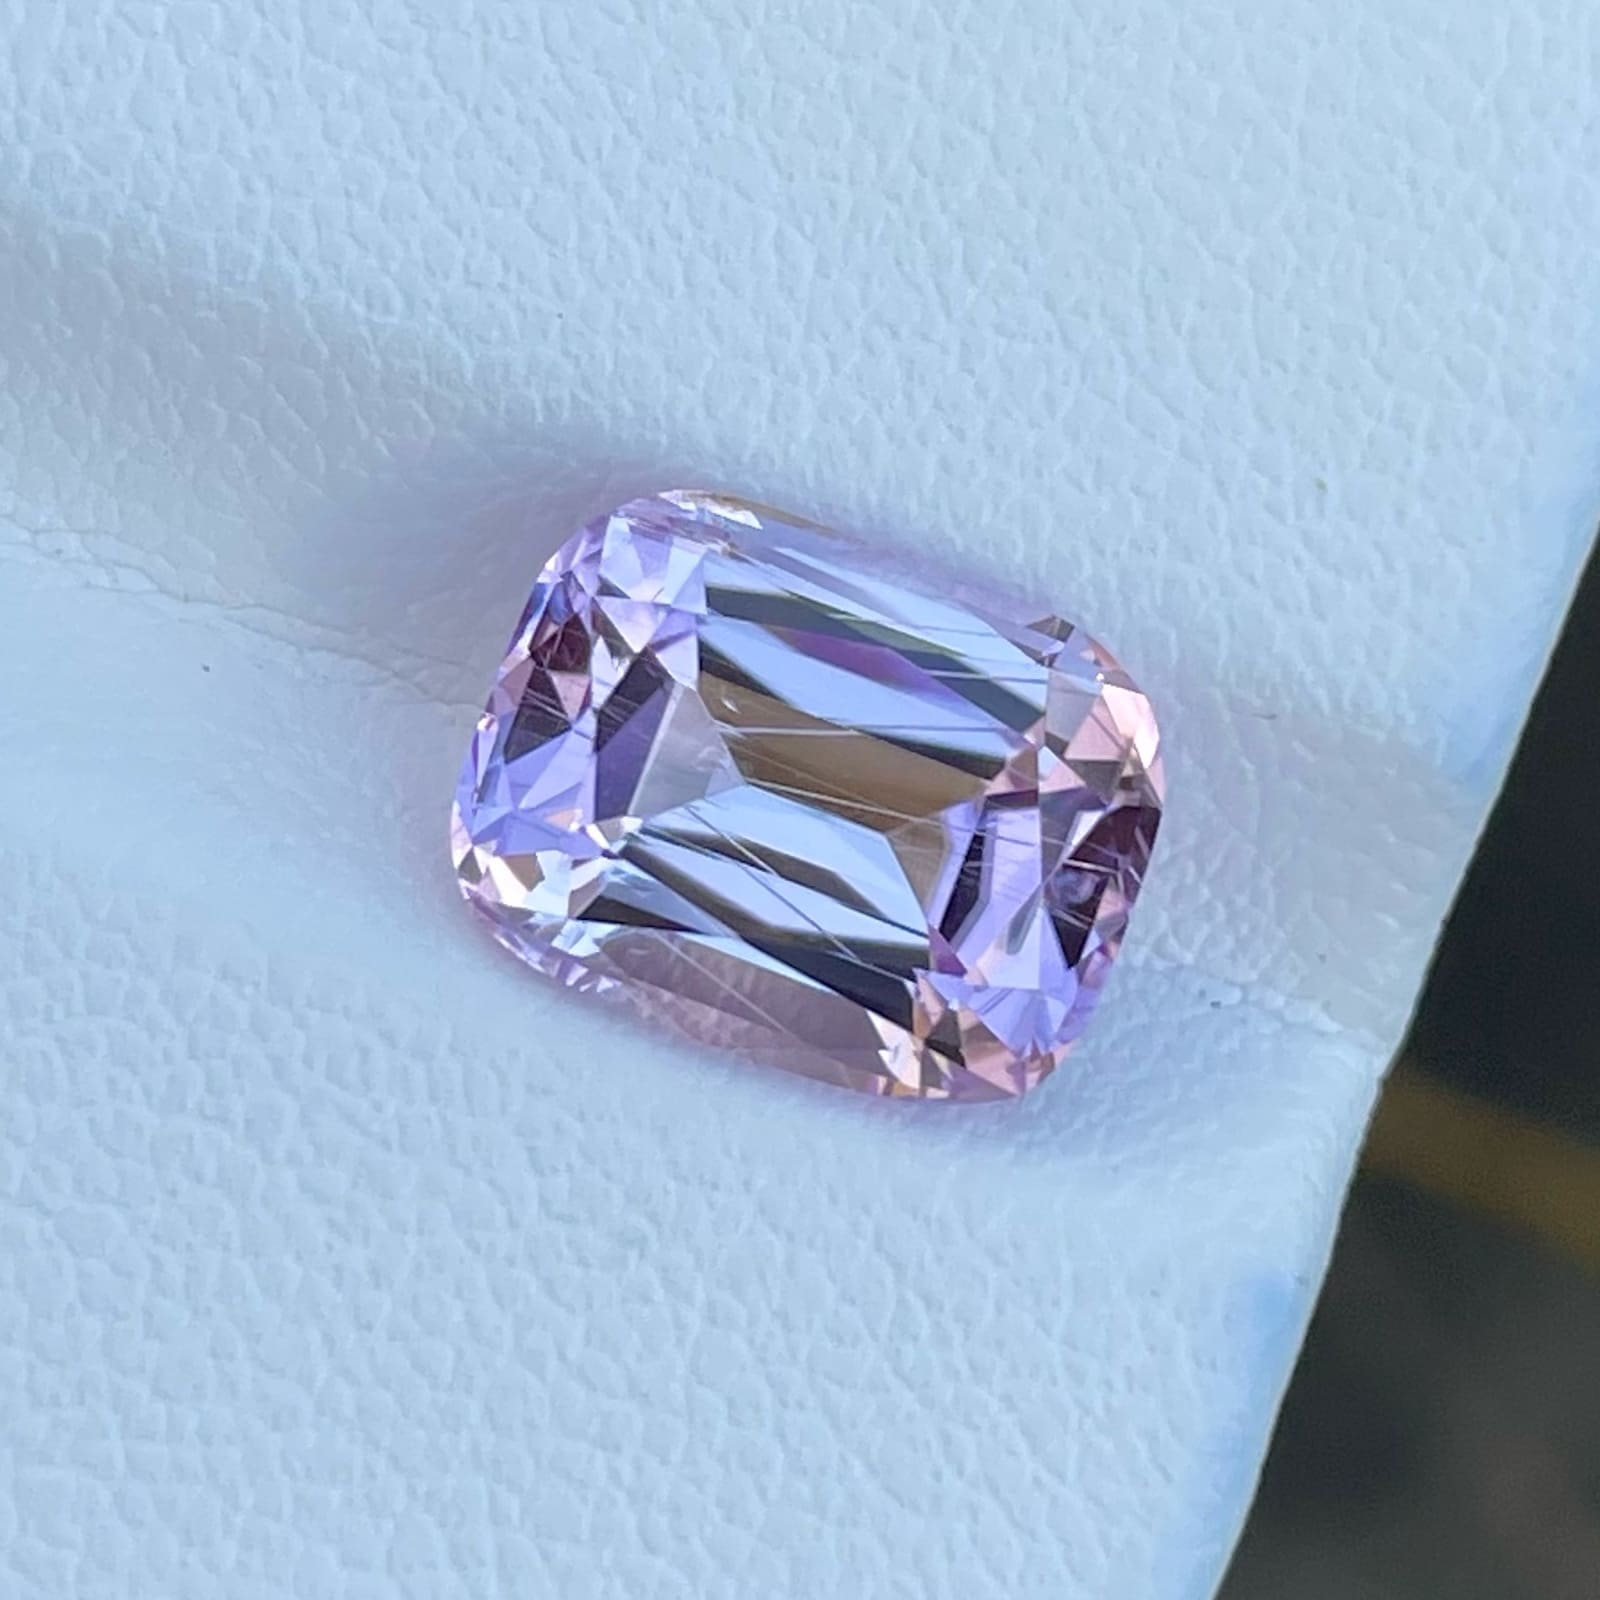 Gemstone Type	Baby Pink Color Natural Kunzite
Weight	4.31 carats
Dimensions	11.0 x 8.5 x 6.0 mm
Clarity	Needles like Inclusions are seen
Shape	Rectangular
Origin	Namibia
Treatment	None
Certificate	Available ( Verify Certificate )